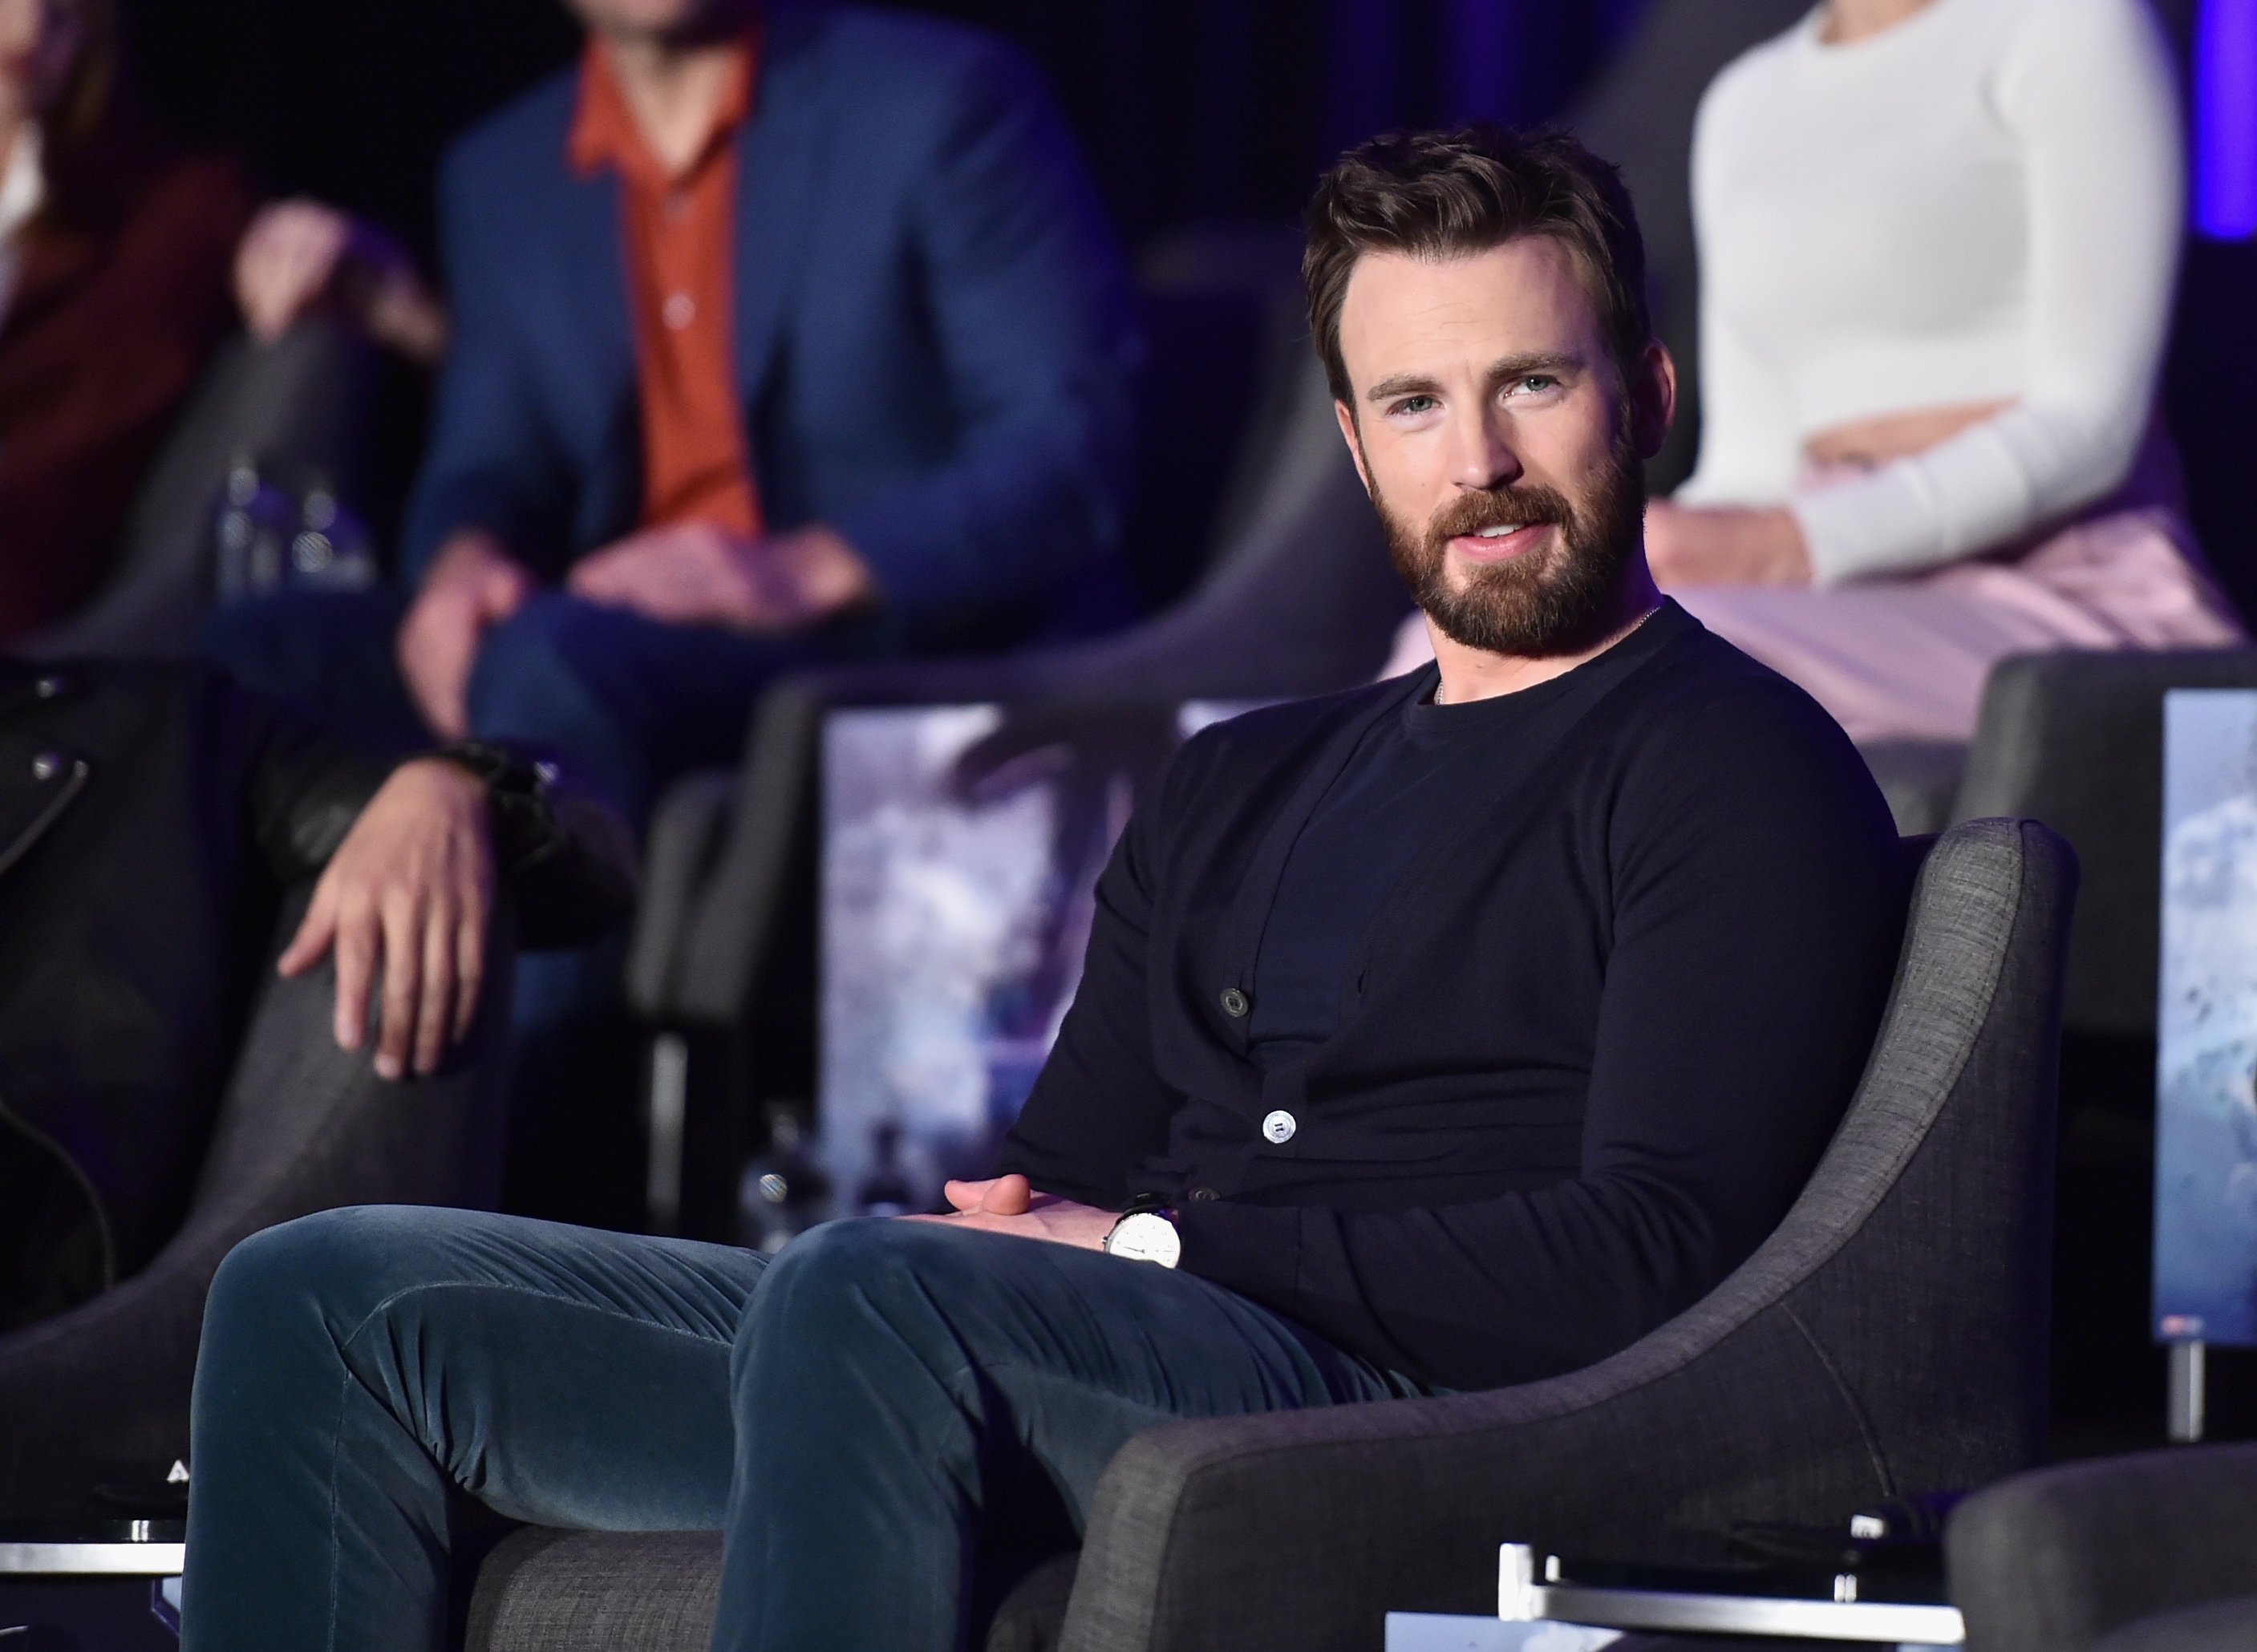 Chris Evans, who played Captain America in the MCU, wears a black cardigan over a dark blue shirt and blue velvet pants.